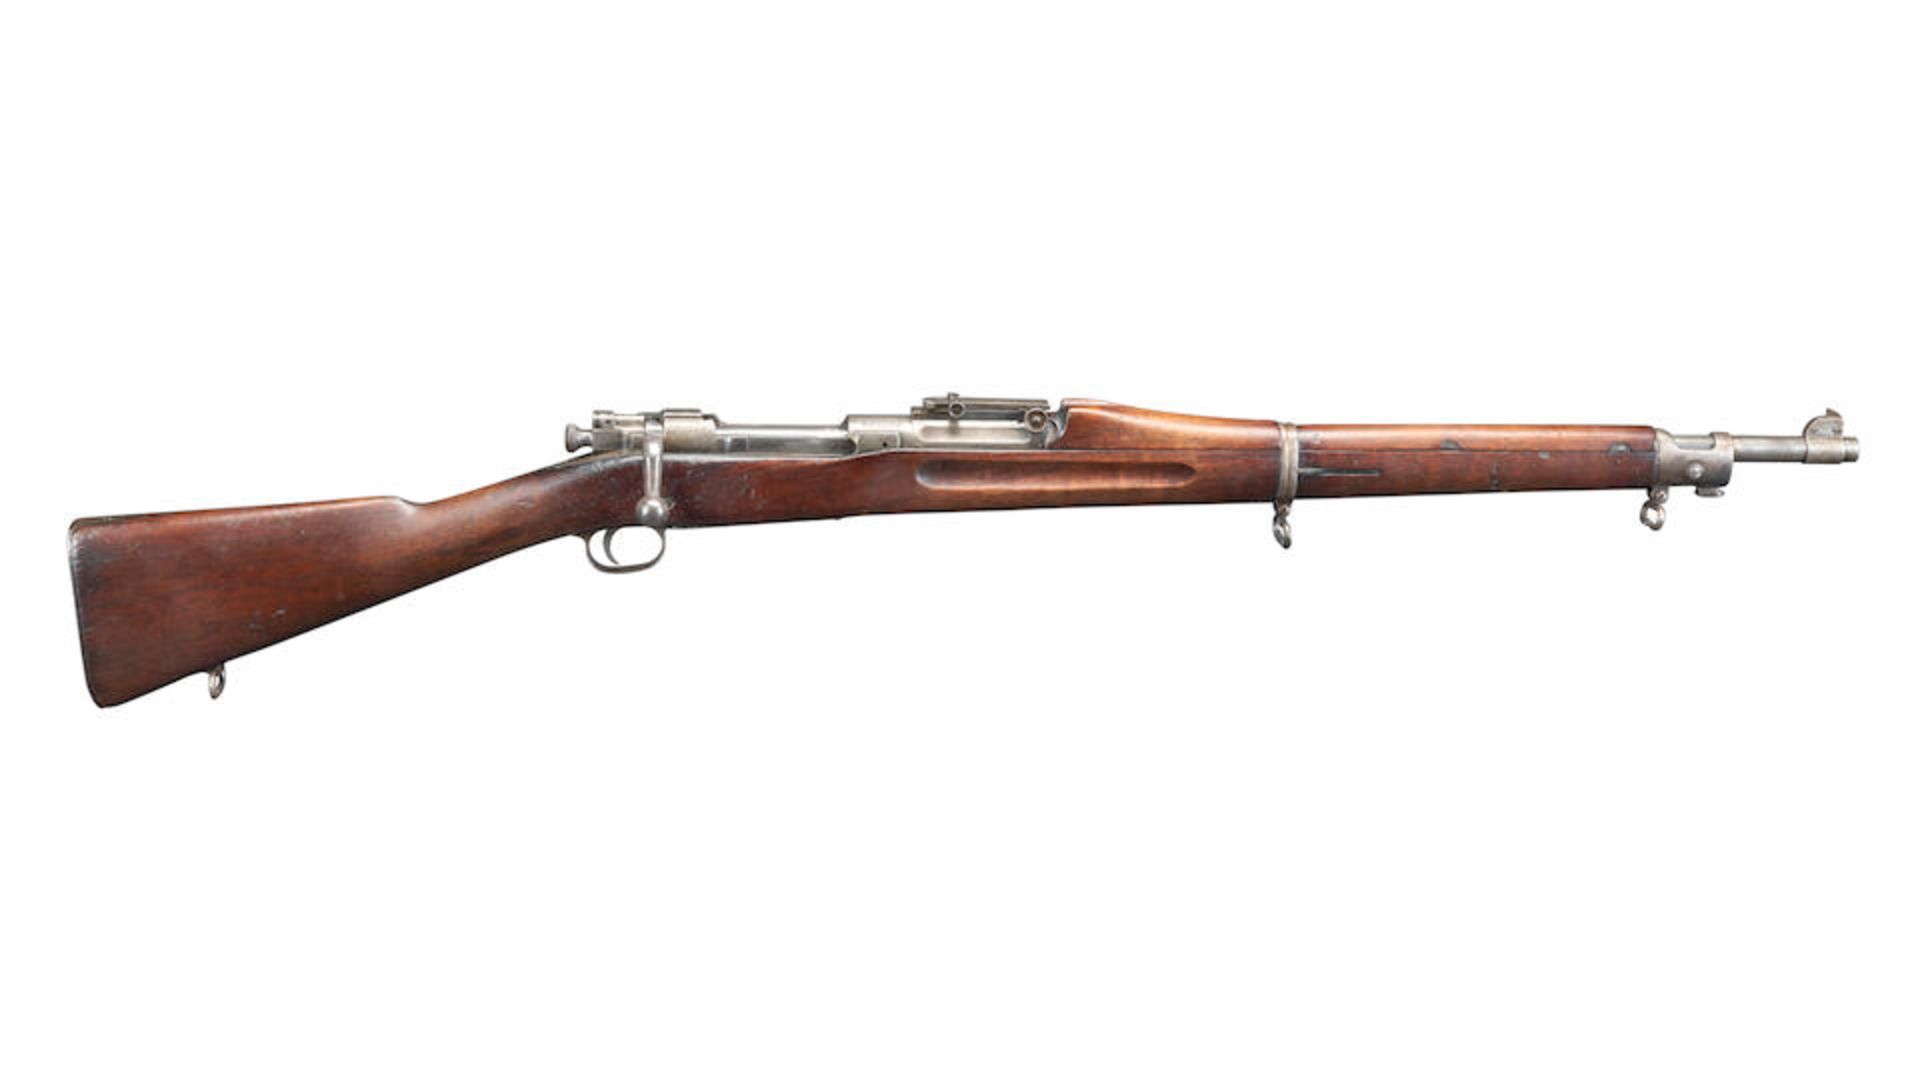 Springfield Armory US Model 1903 Bolt Action Rifle, Curio or Relic firearm - Image 3 of 3